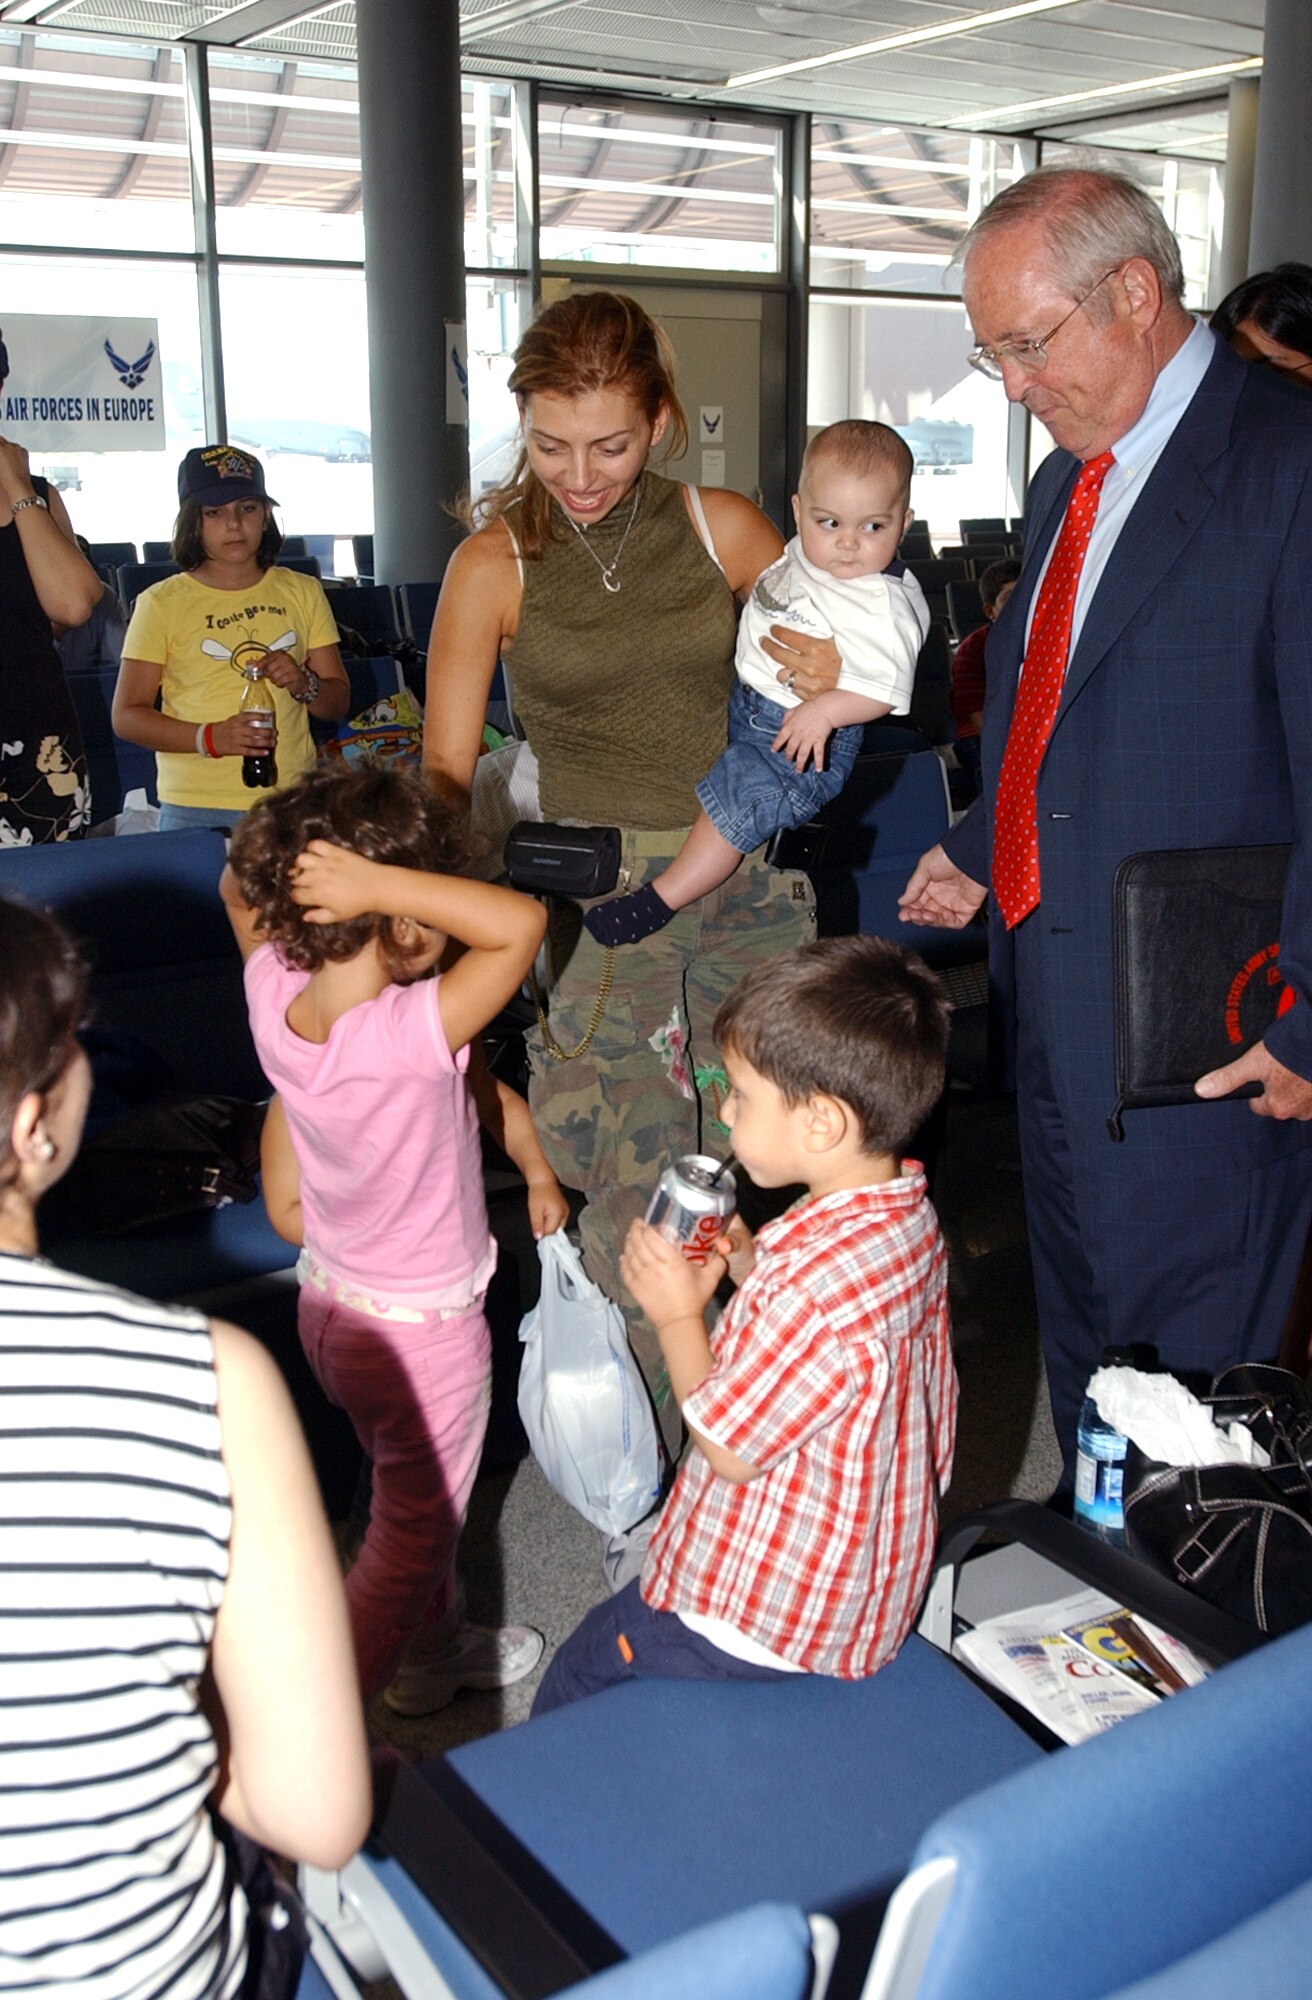 The Honorable William R. Timken, Jr., U.S. Ambassador to Germany, speaks with displaced Americans at the passenger terminal at Ramstein Air Base, Germany, on July 25. Ramstein Airmen provided humanitarian assistance for American citizens departing the Lebanon crisis on their way to the United States. (U.S. Air Force photo/Airman Amber Sorsek-Bressler) 

